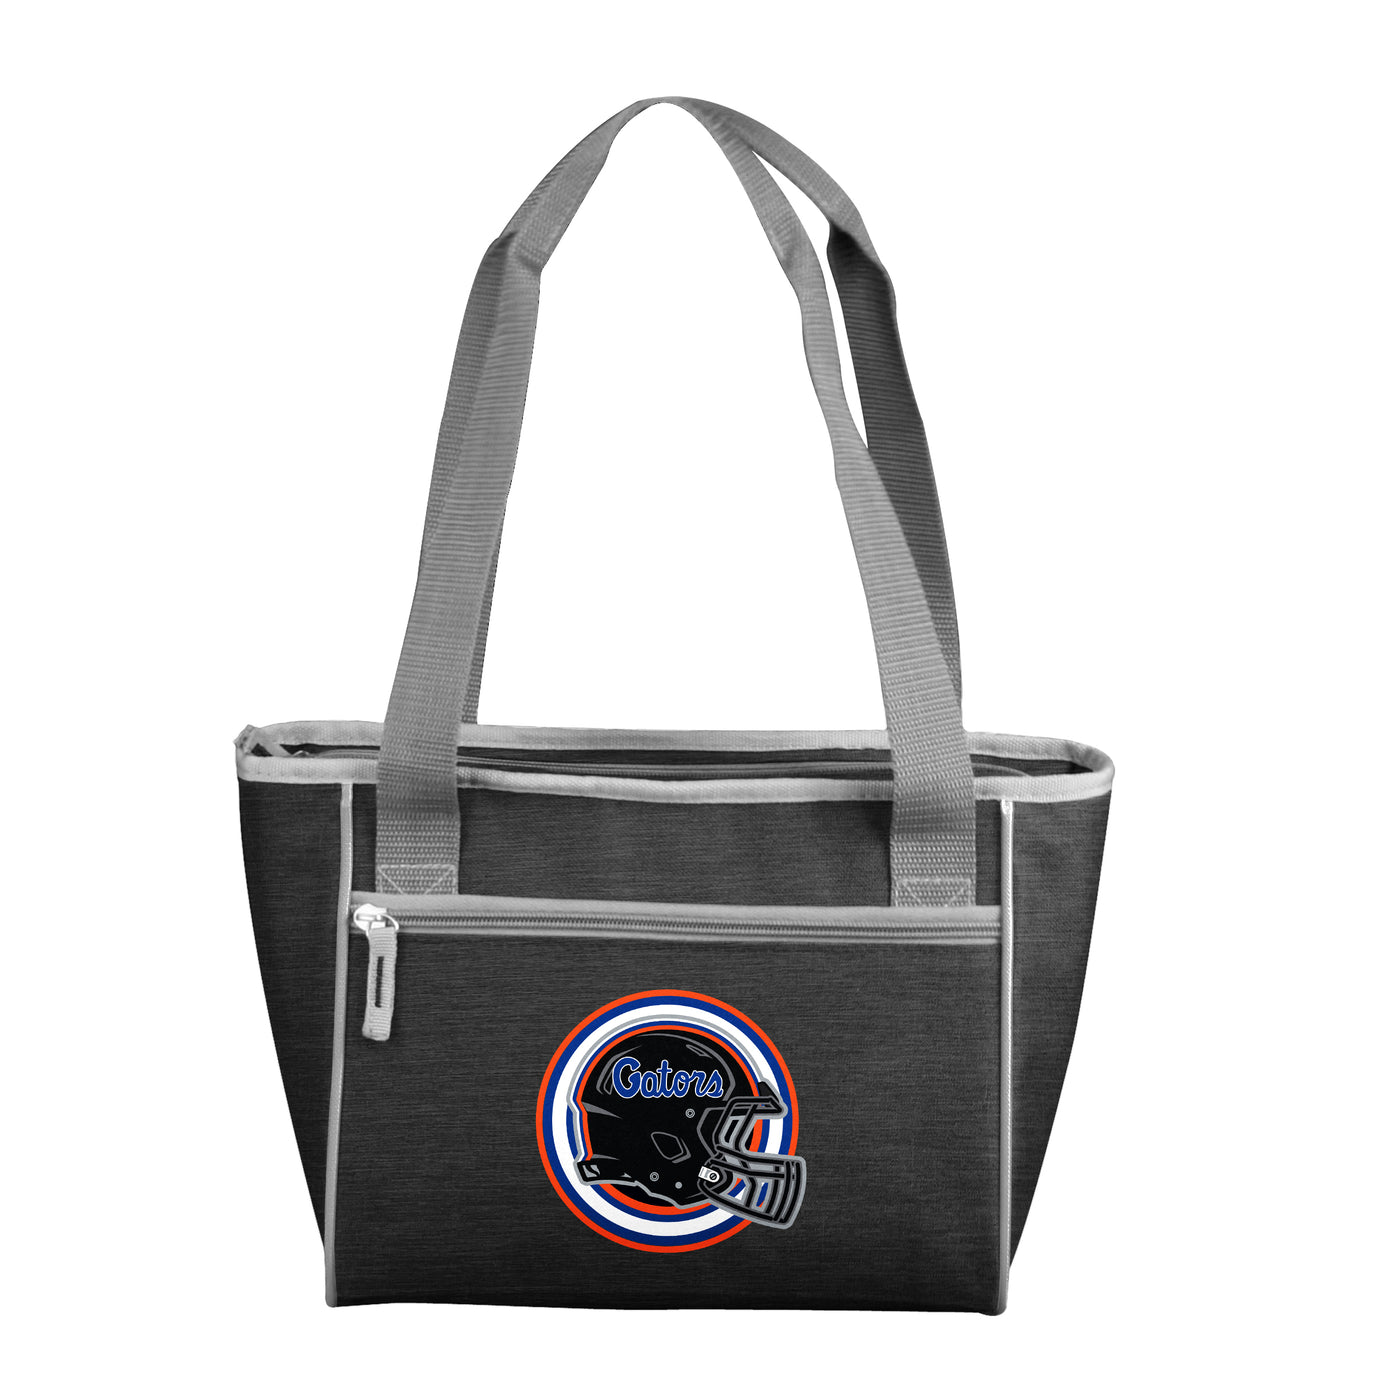 Florida Black Out 16 Can Cooler Tote